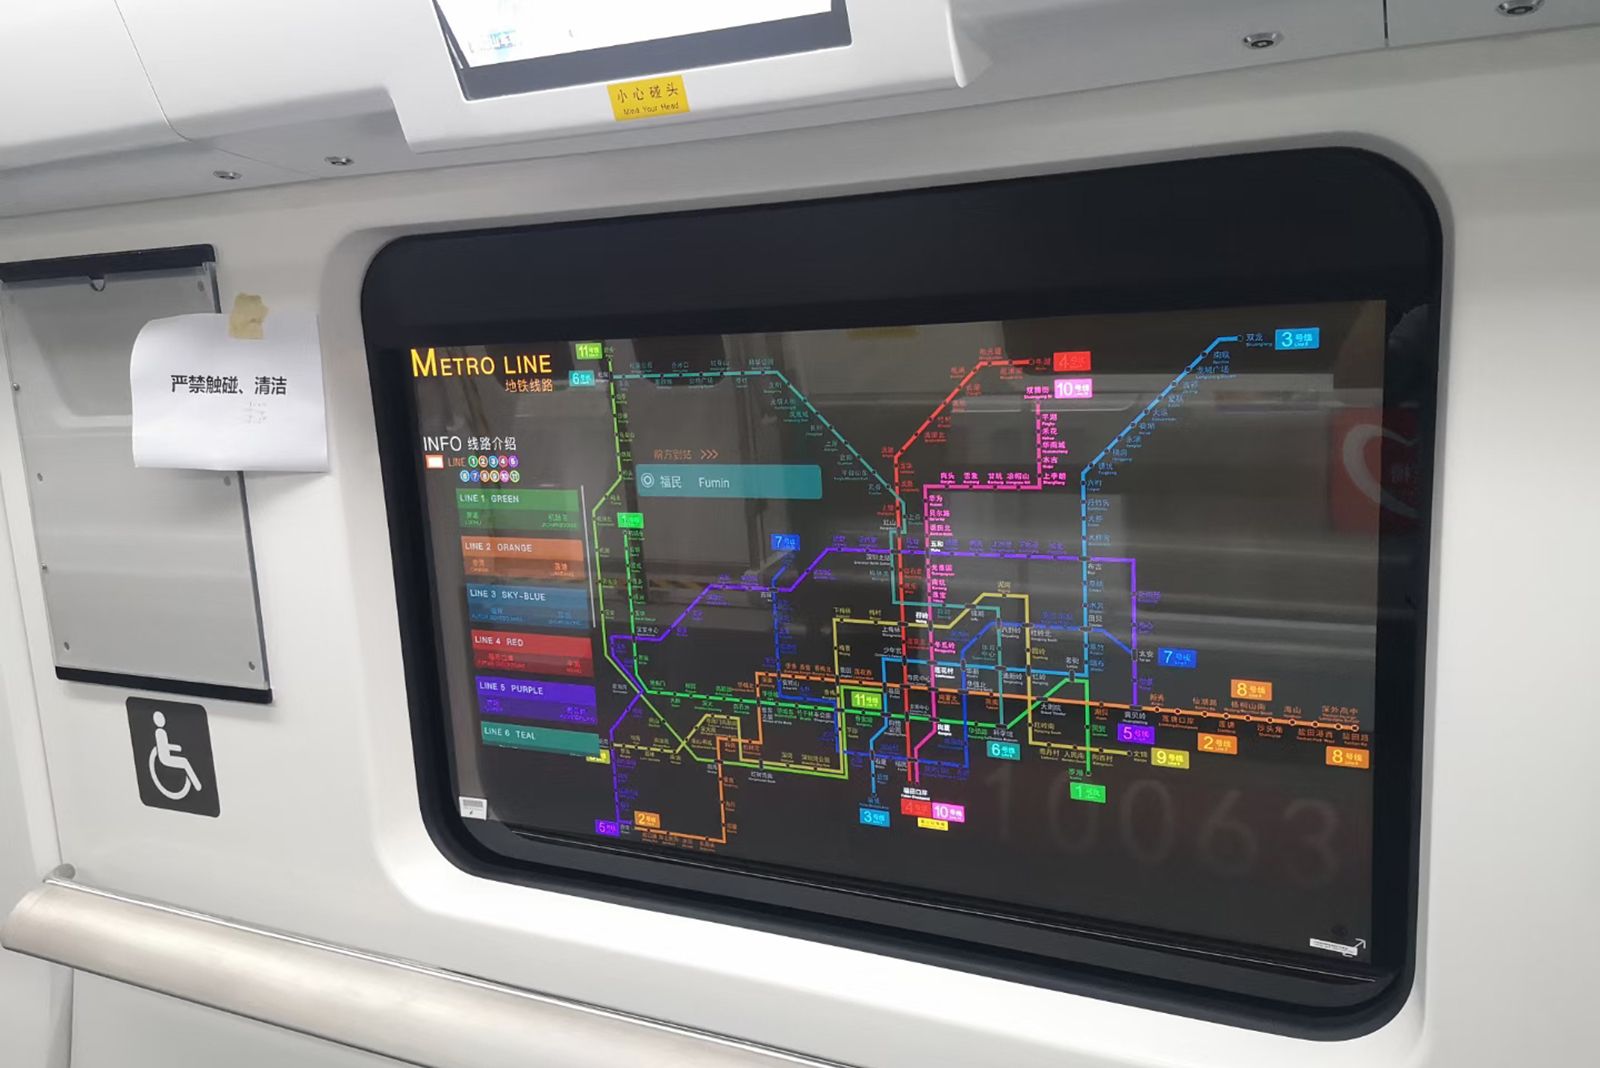 LG made a transparent OLED display for subway windows in China photo 1